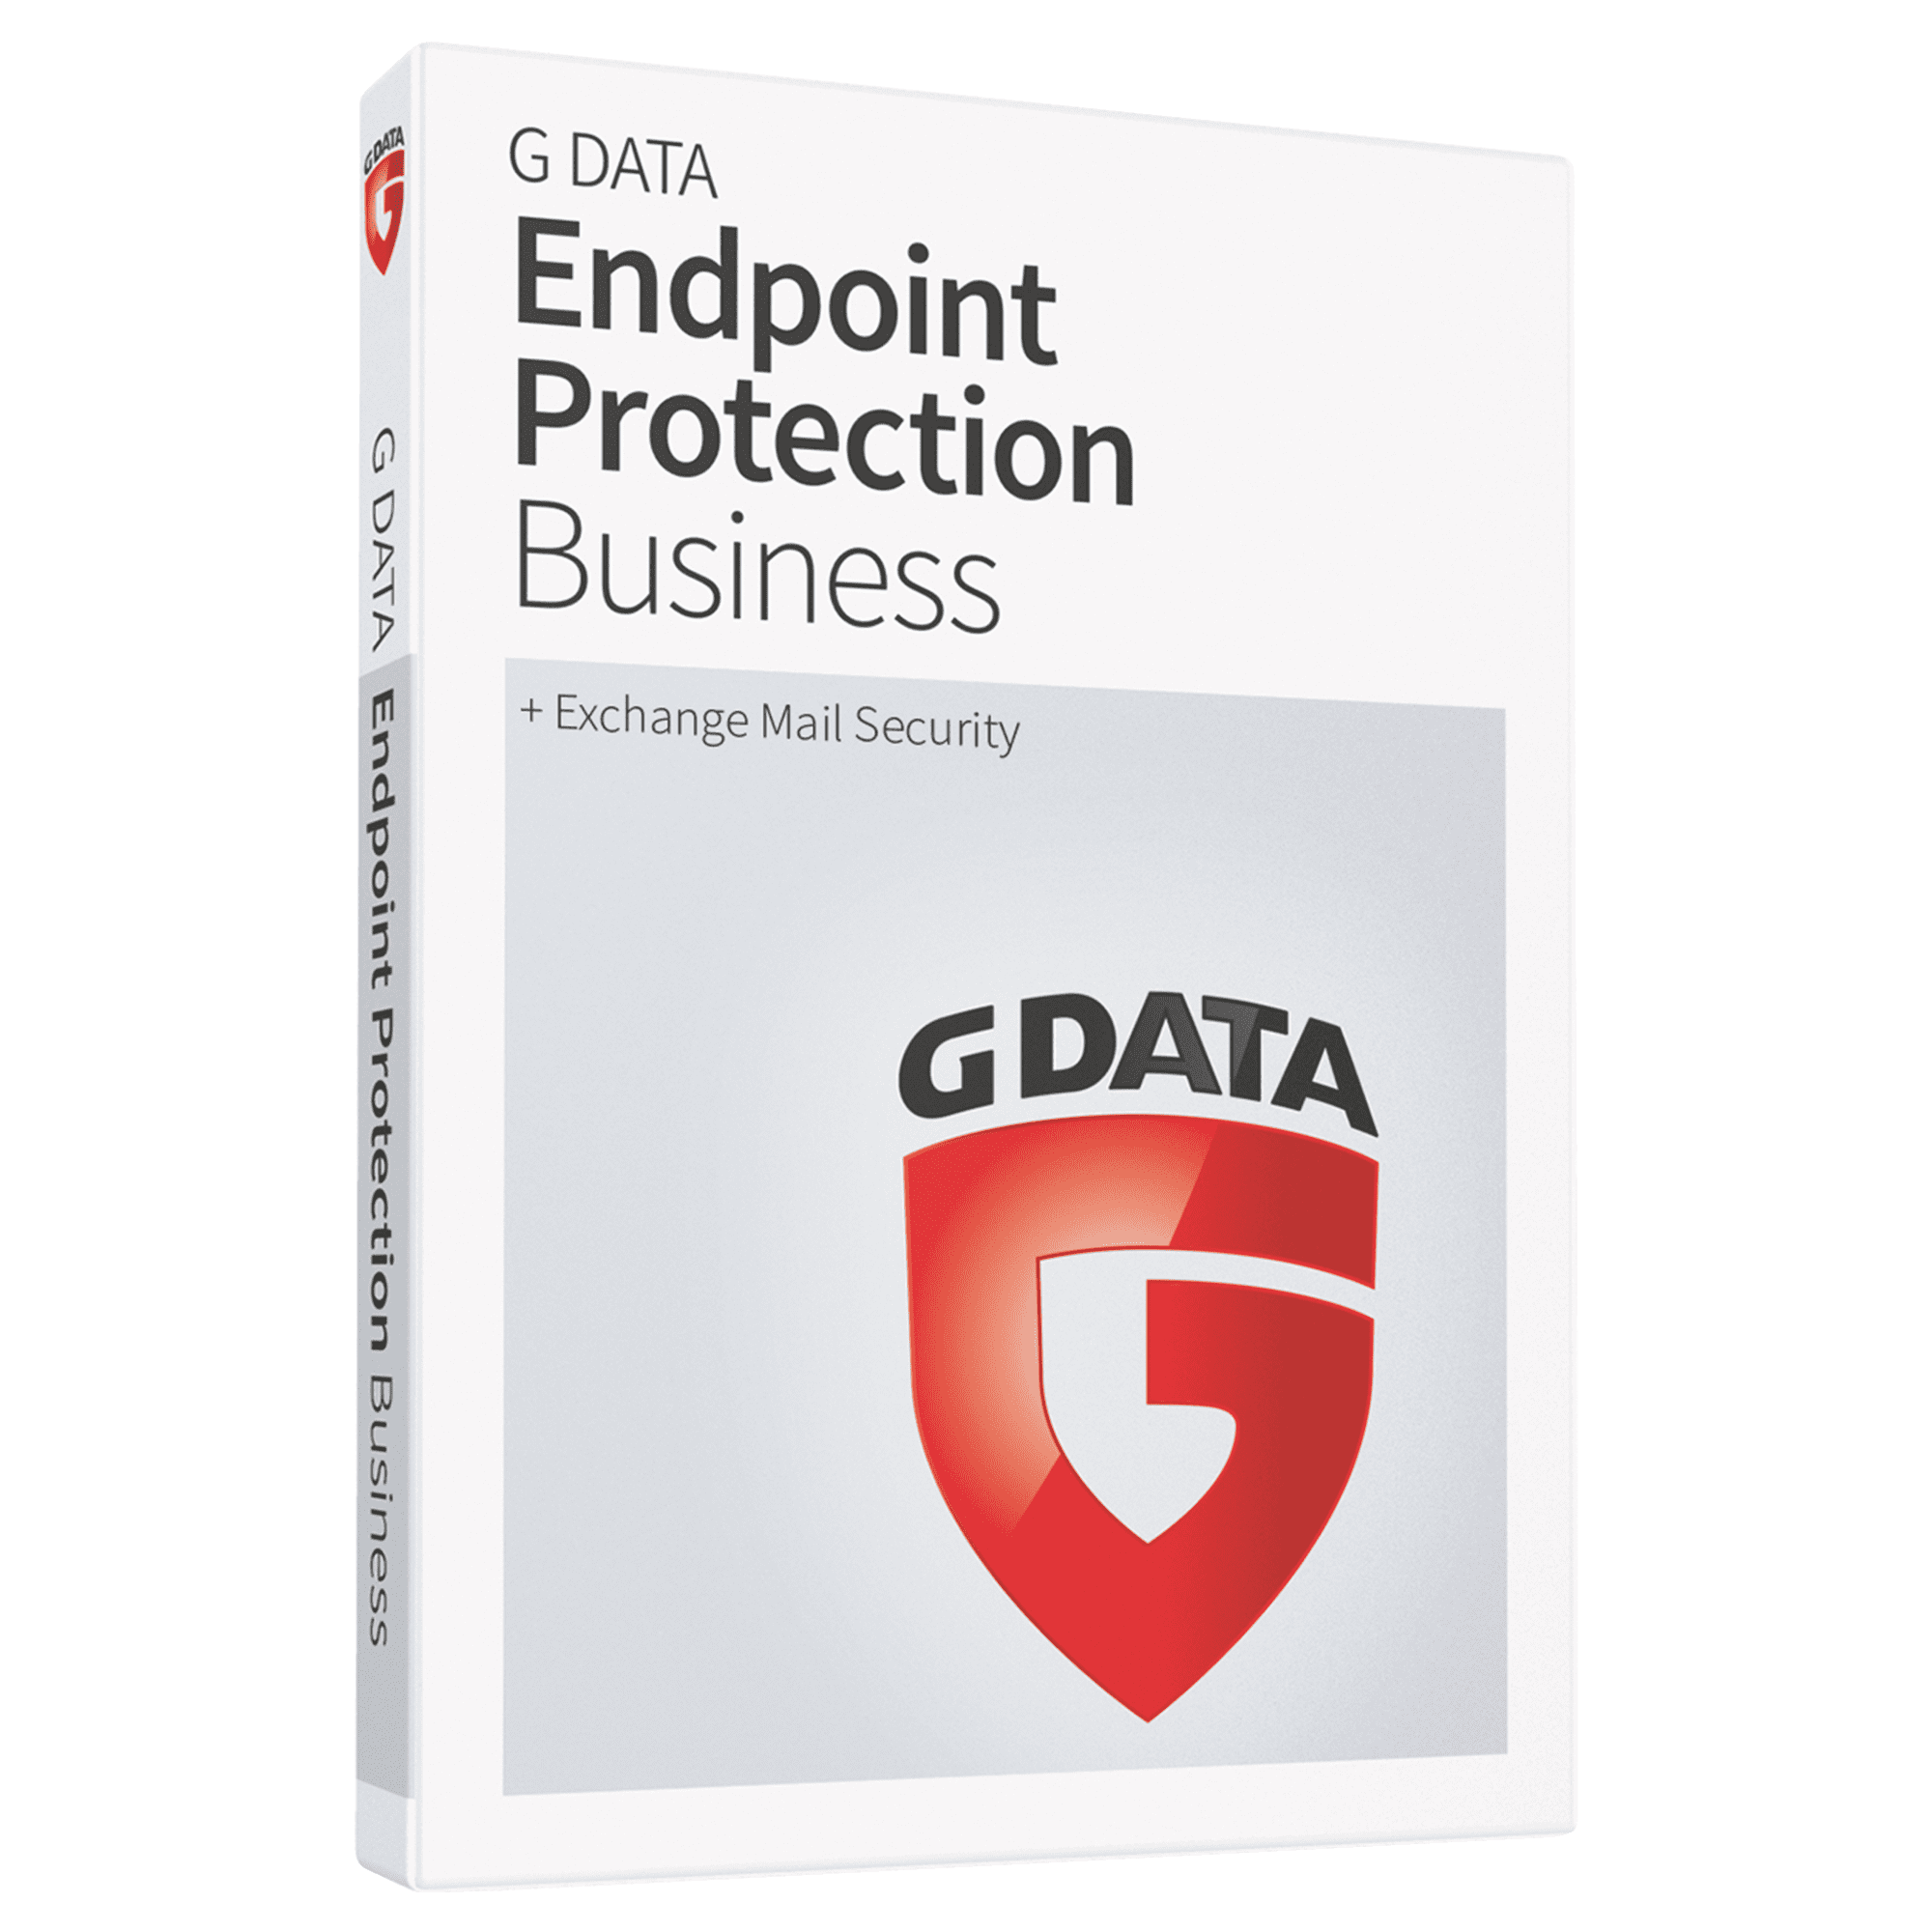 G Data Endpoint Protection Business (+ Exchange Mail Security) - Verlängerung